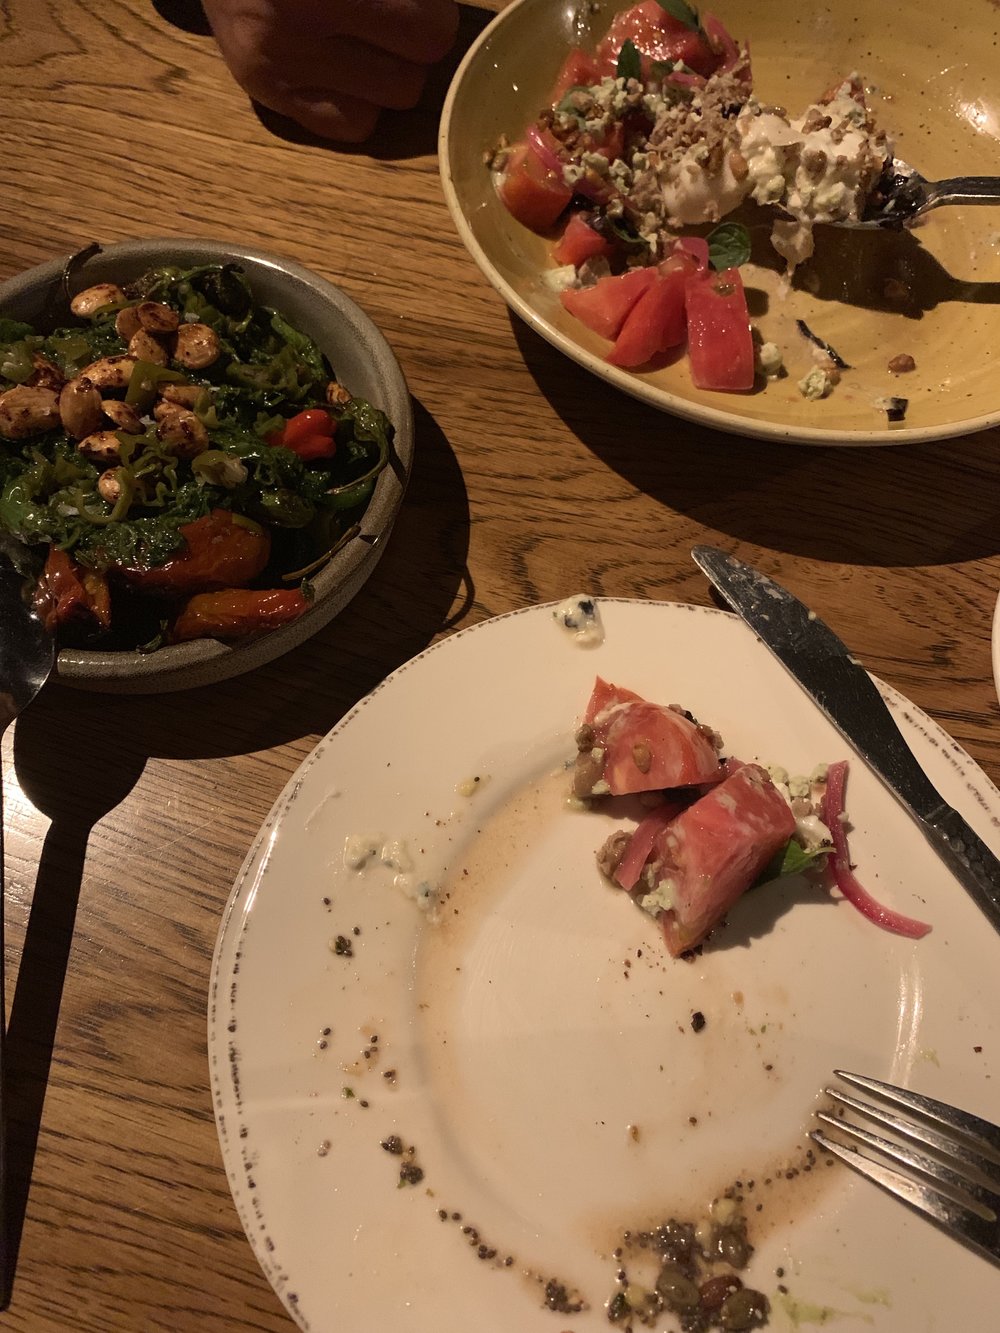 Really much too in the moment to commit to photo journaling our meal but trust me when I say it was AMAZING. If you’re in San Diego put this restaurant on your list!